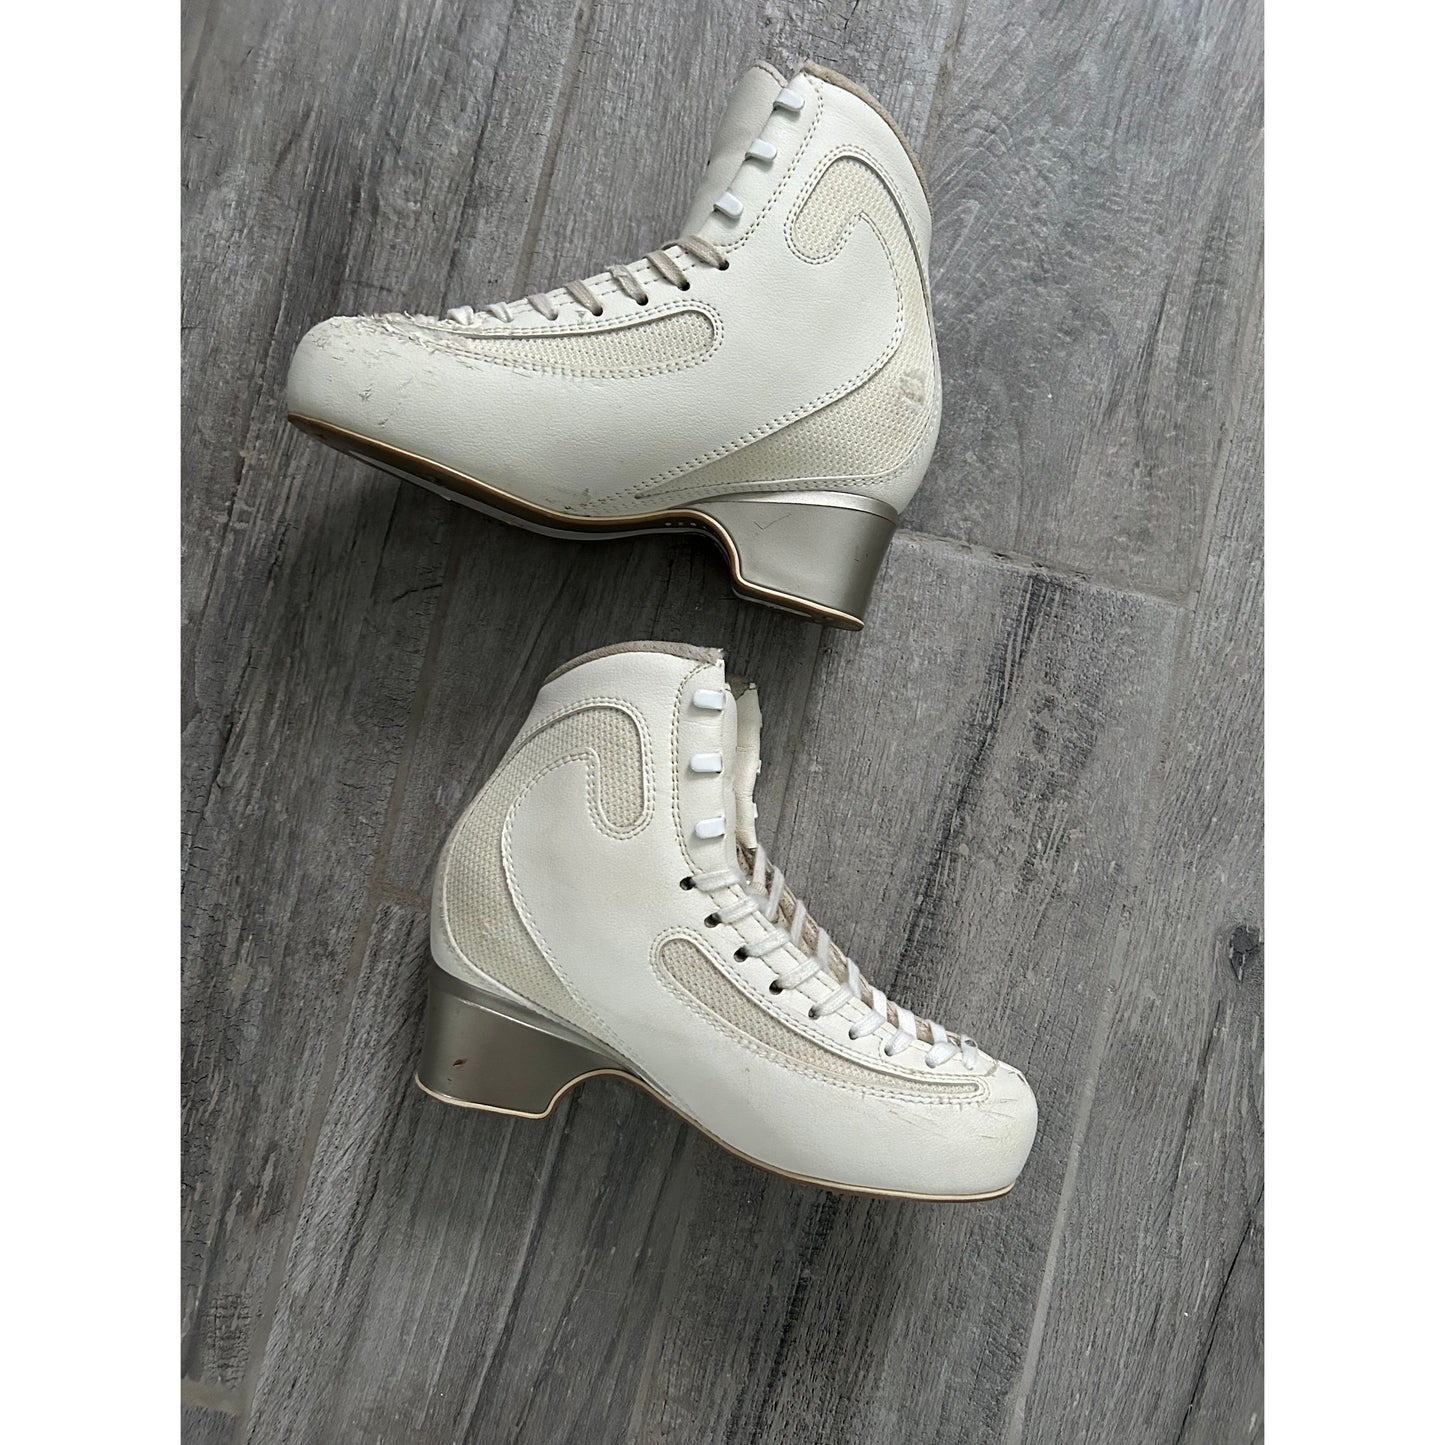 Edea Ice Fly Boots Size 230 C - Used